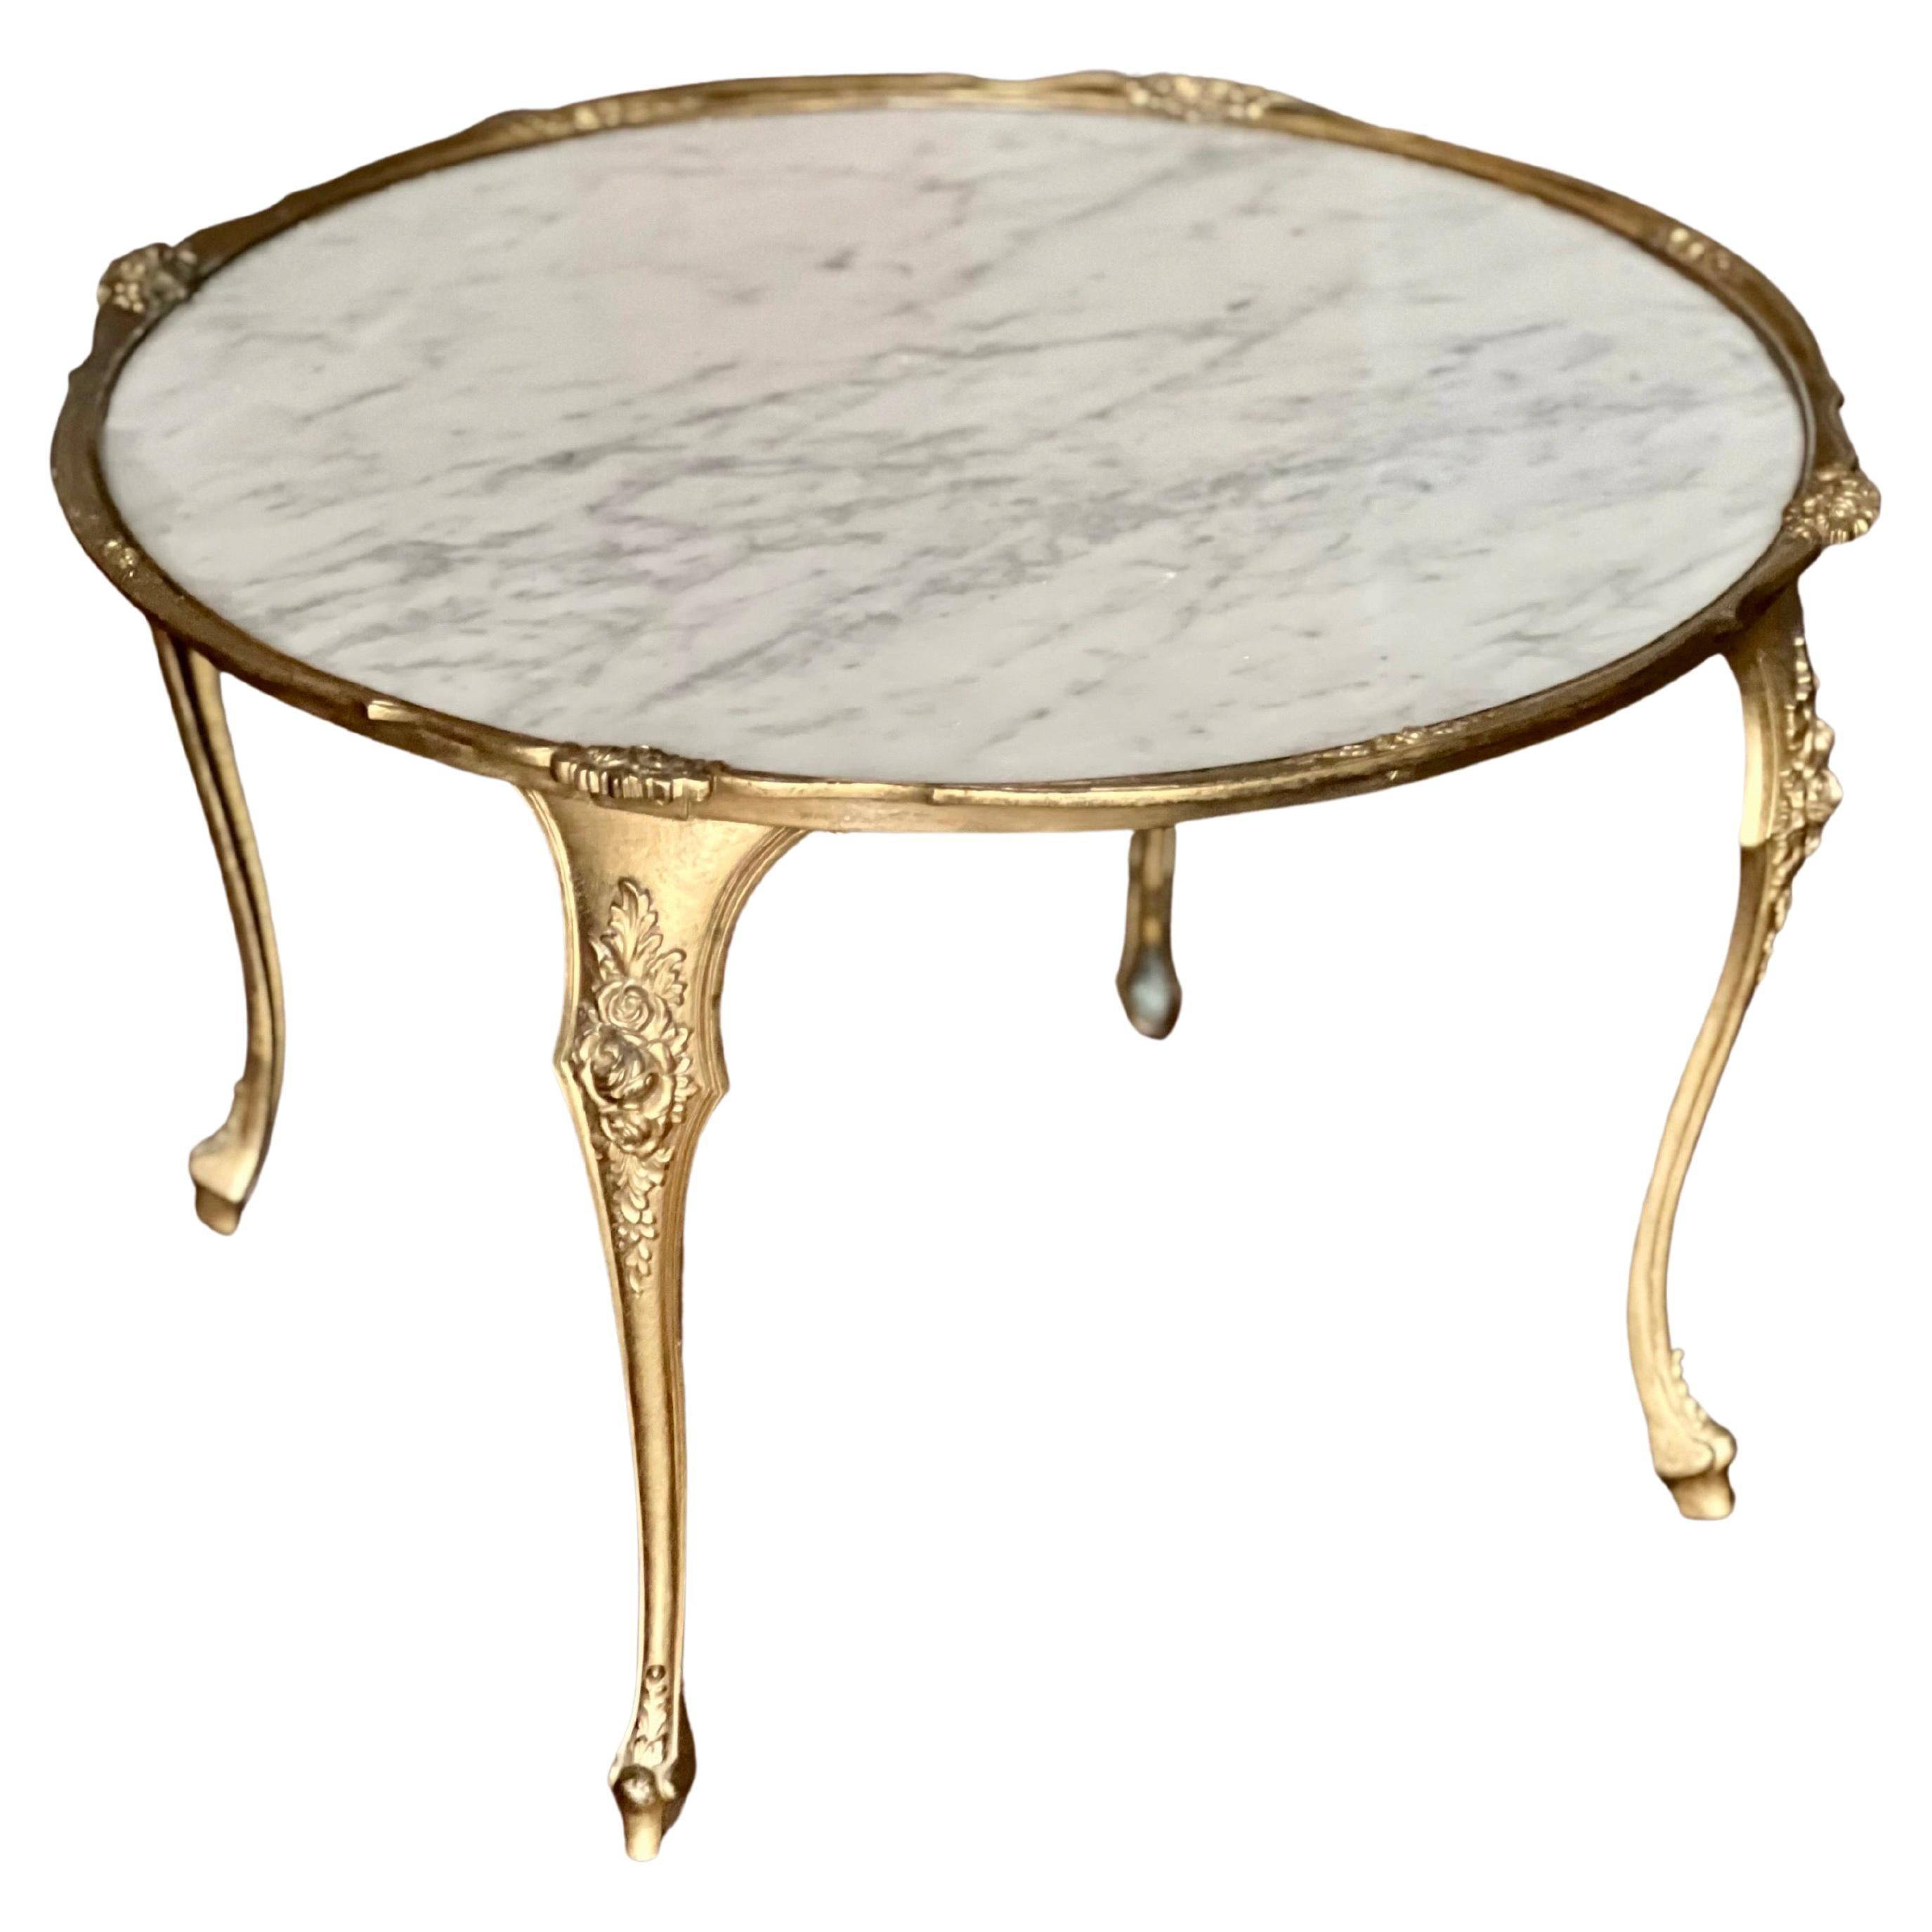 Vintage French Empire Solid Brass and Carrara Marble Top Coffee or Side Table For Sale